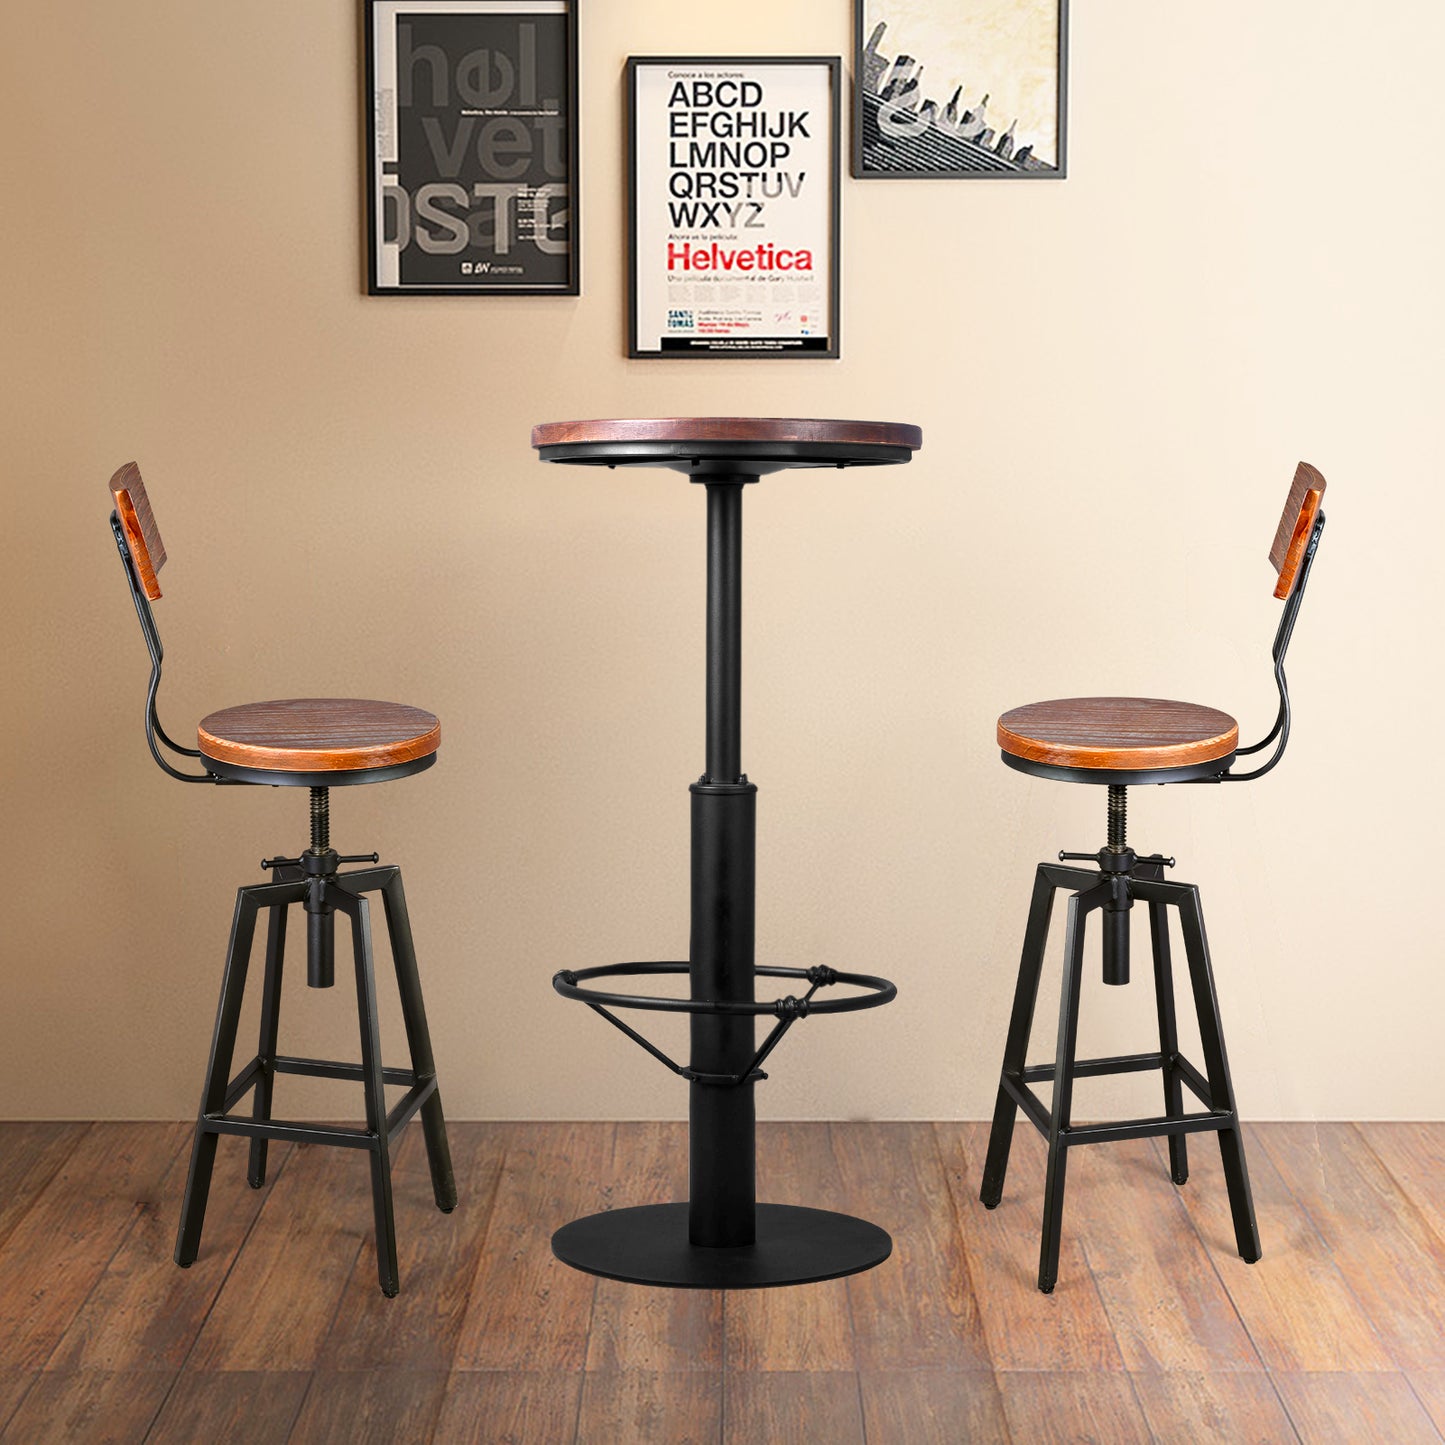 SET OF 3, Farmhouse Bar Table(42.2inch) and 2 Bar Stools with  Backrest(25.6-31.5inch ) Pub Bistro Table for Kitchen Dinning Room Coffee House Office(BLACK)